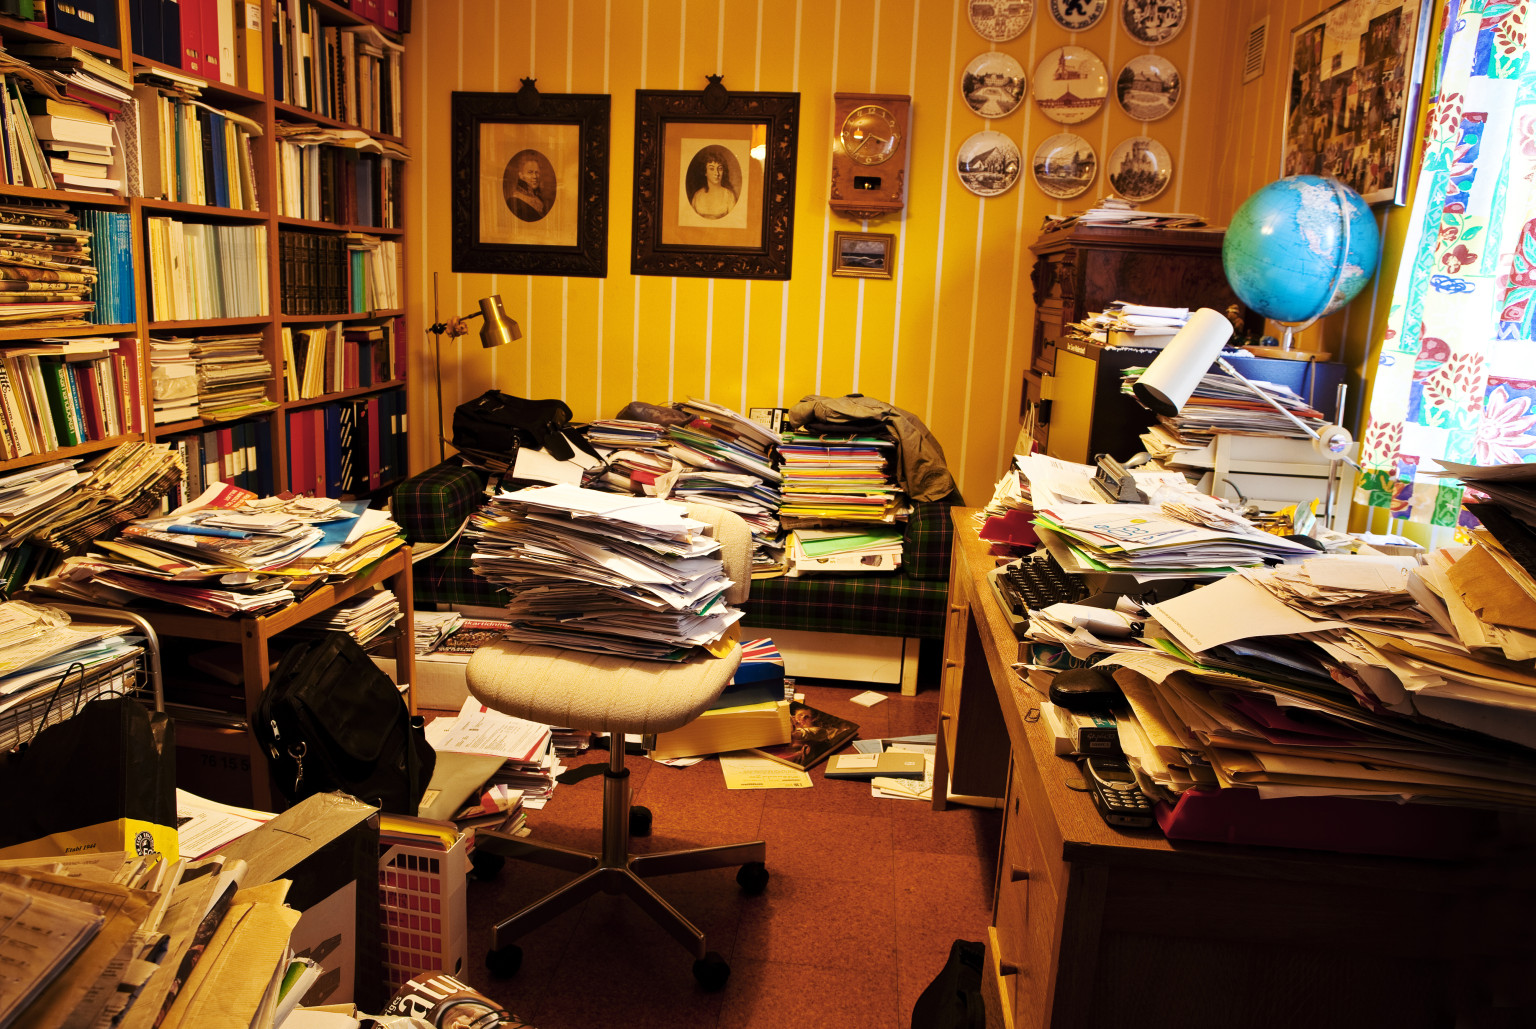 Messy Work Spaces Spur Creativity While Tidy Environments Linked With Healthy Choices